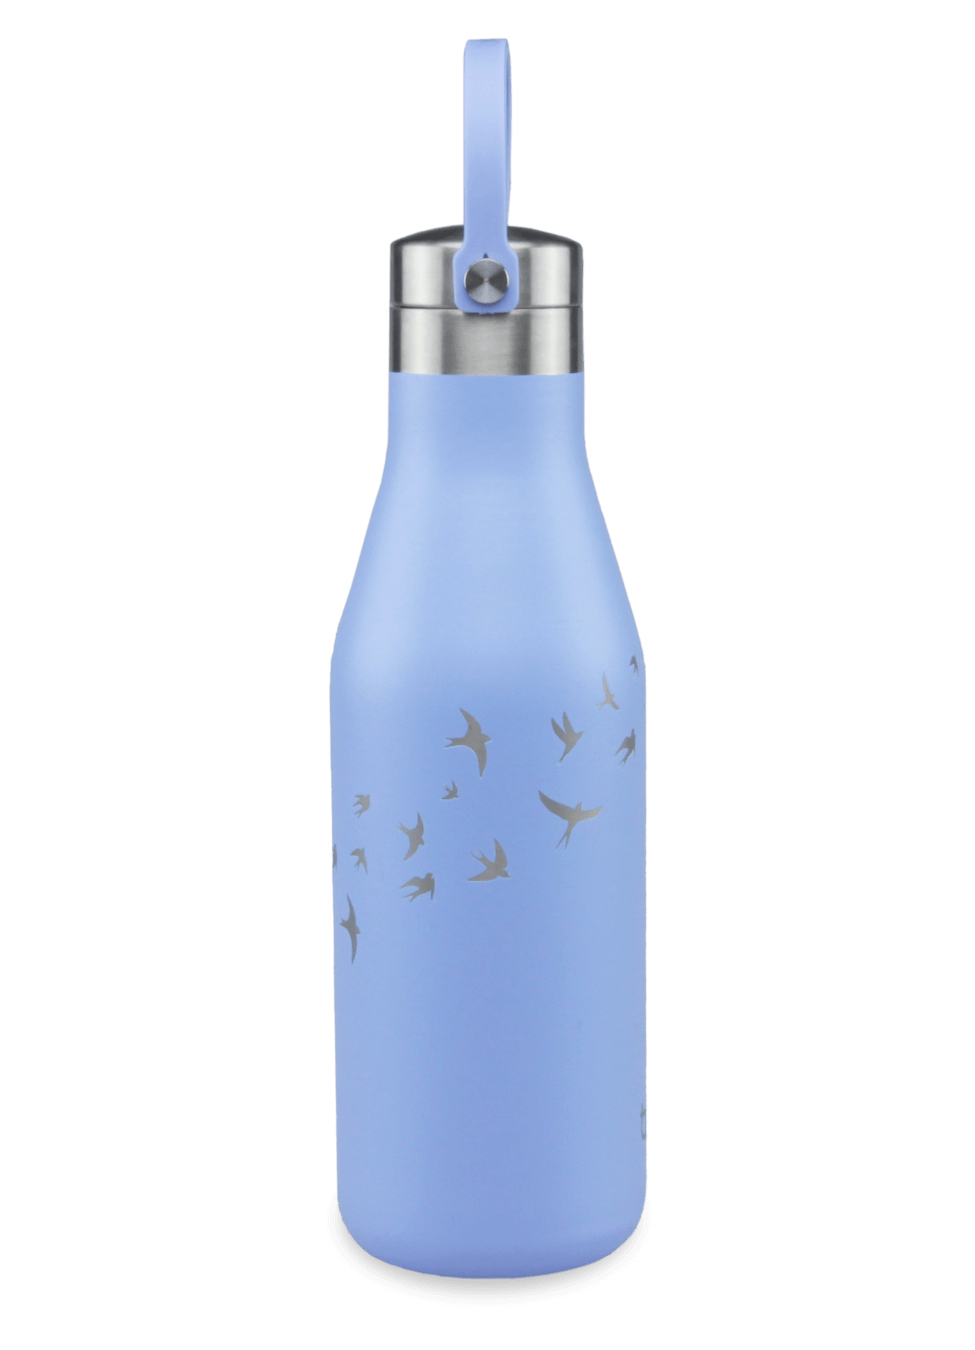 7 Reusable Dishwasher Safe Water Bottles Images, Stock Photos, 3D objects,  & Vectors